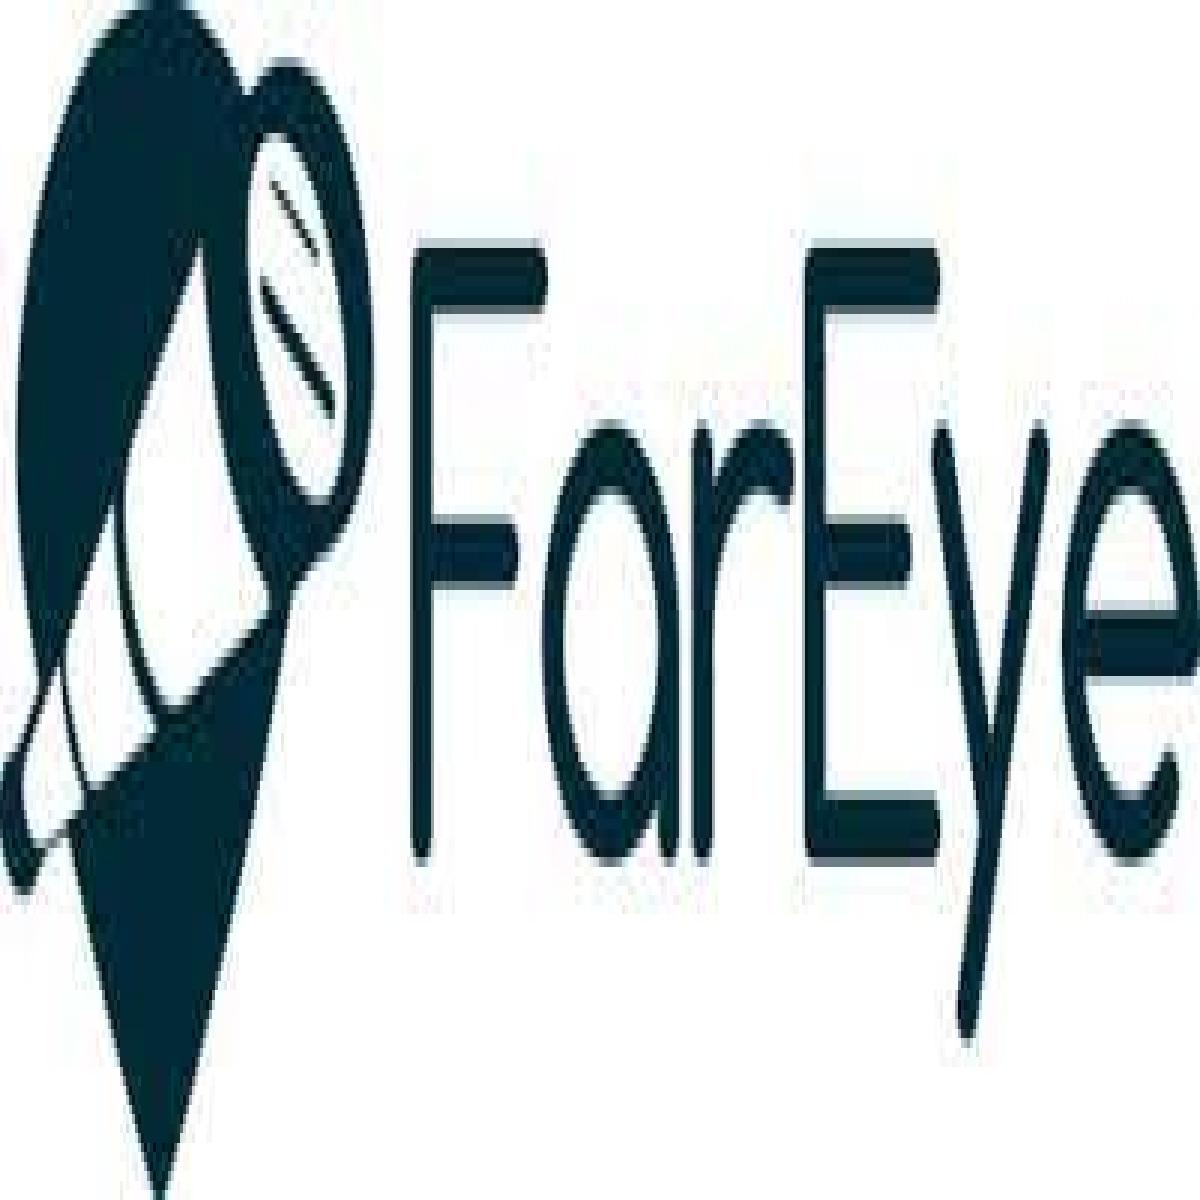 FarEye Collaborates with Pepperfry to Improve Furniture Delivery Experience